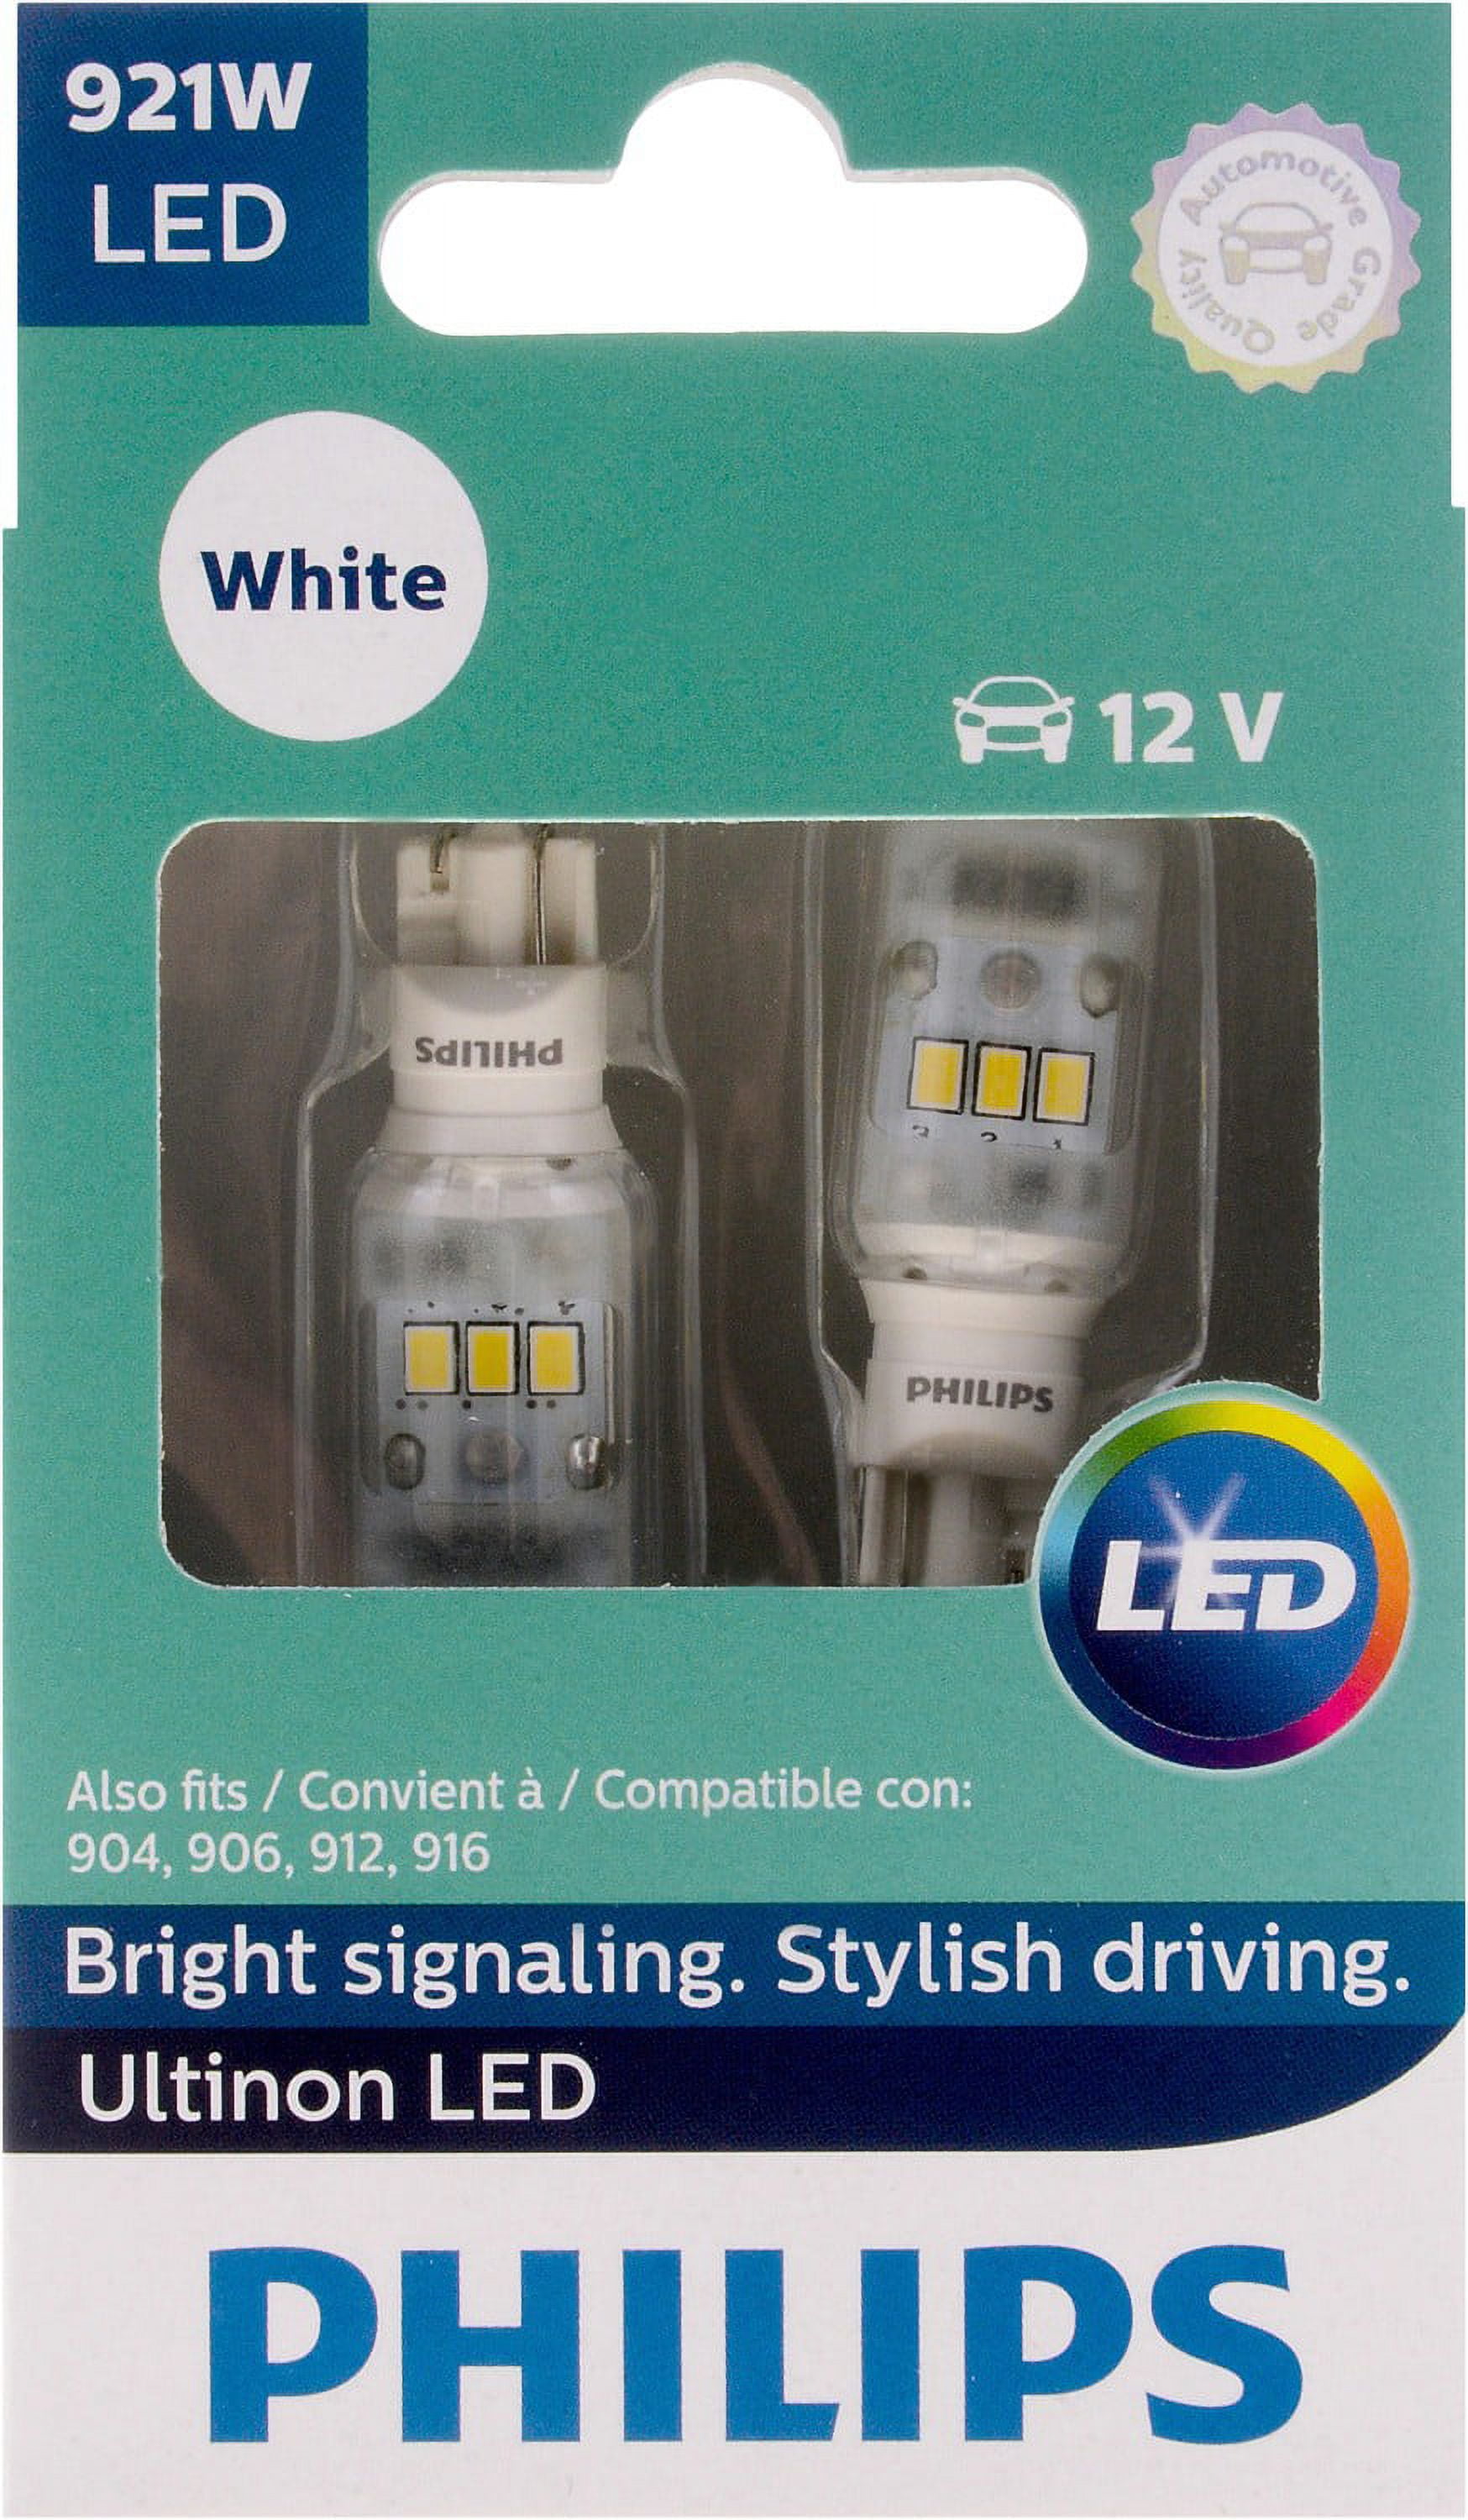 Philips Ultinon LED 921 White Miniature Bulb (2-Pack) 921WLED - The Home  Depot